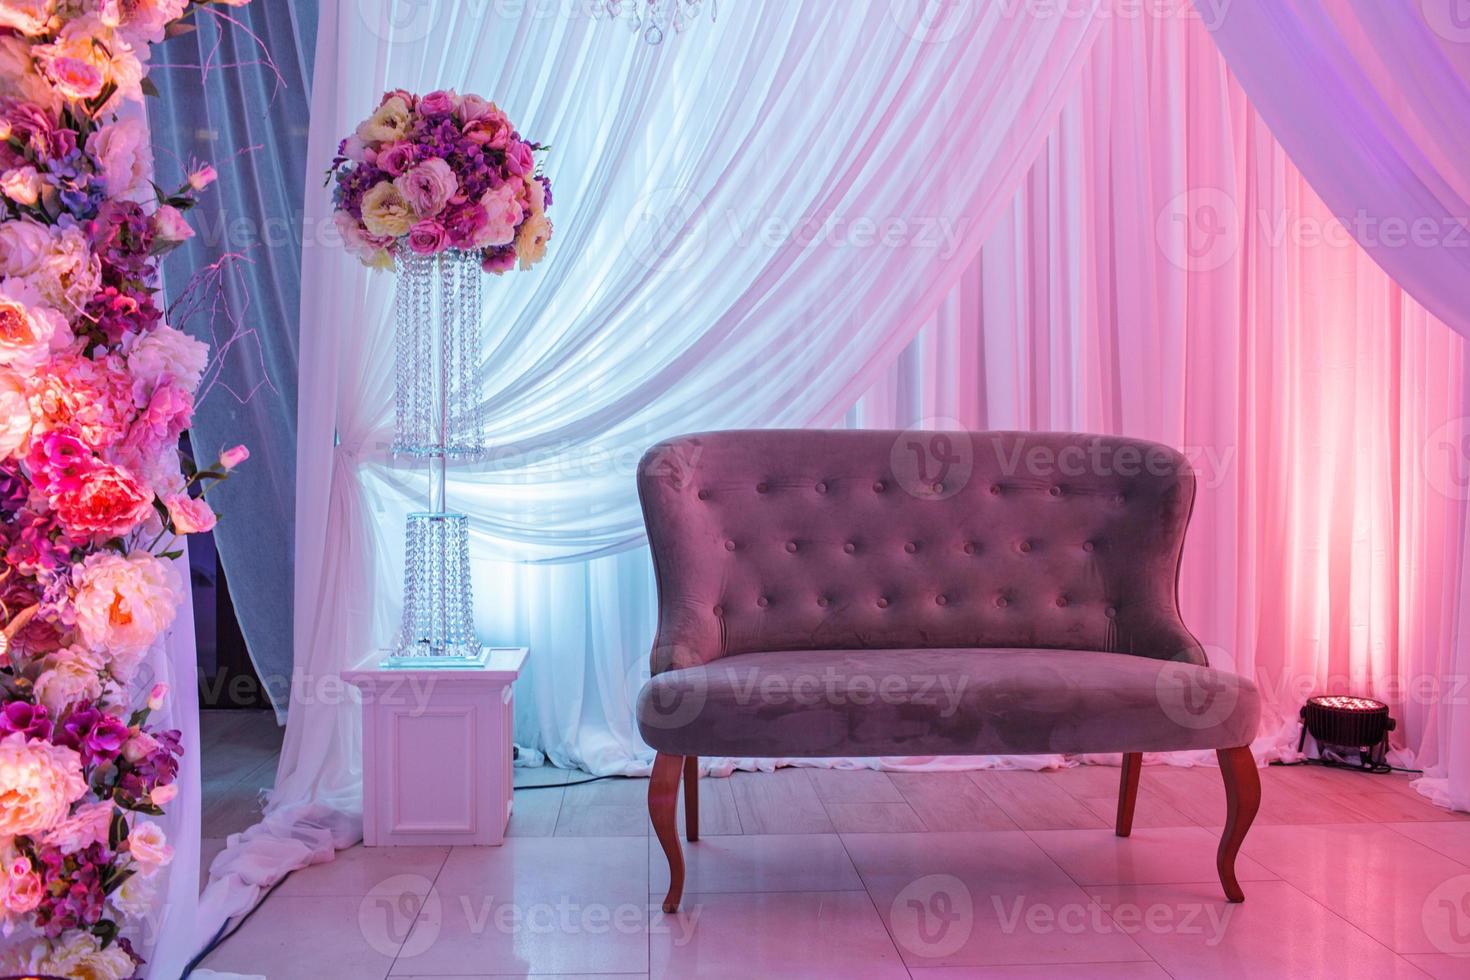 wedding decor with classic retro sofa and white, pink flowers. photo